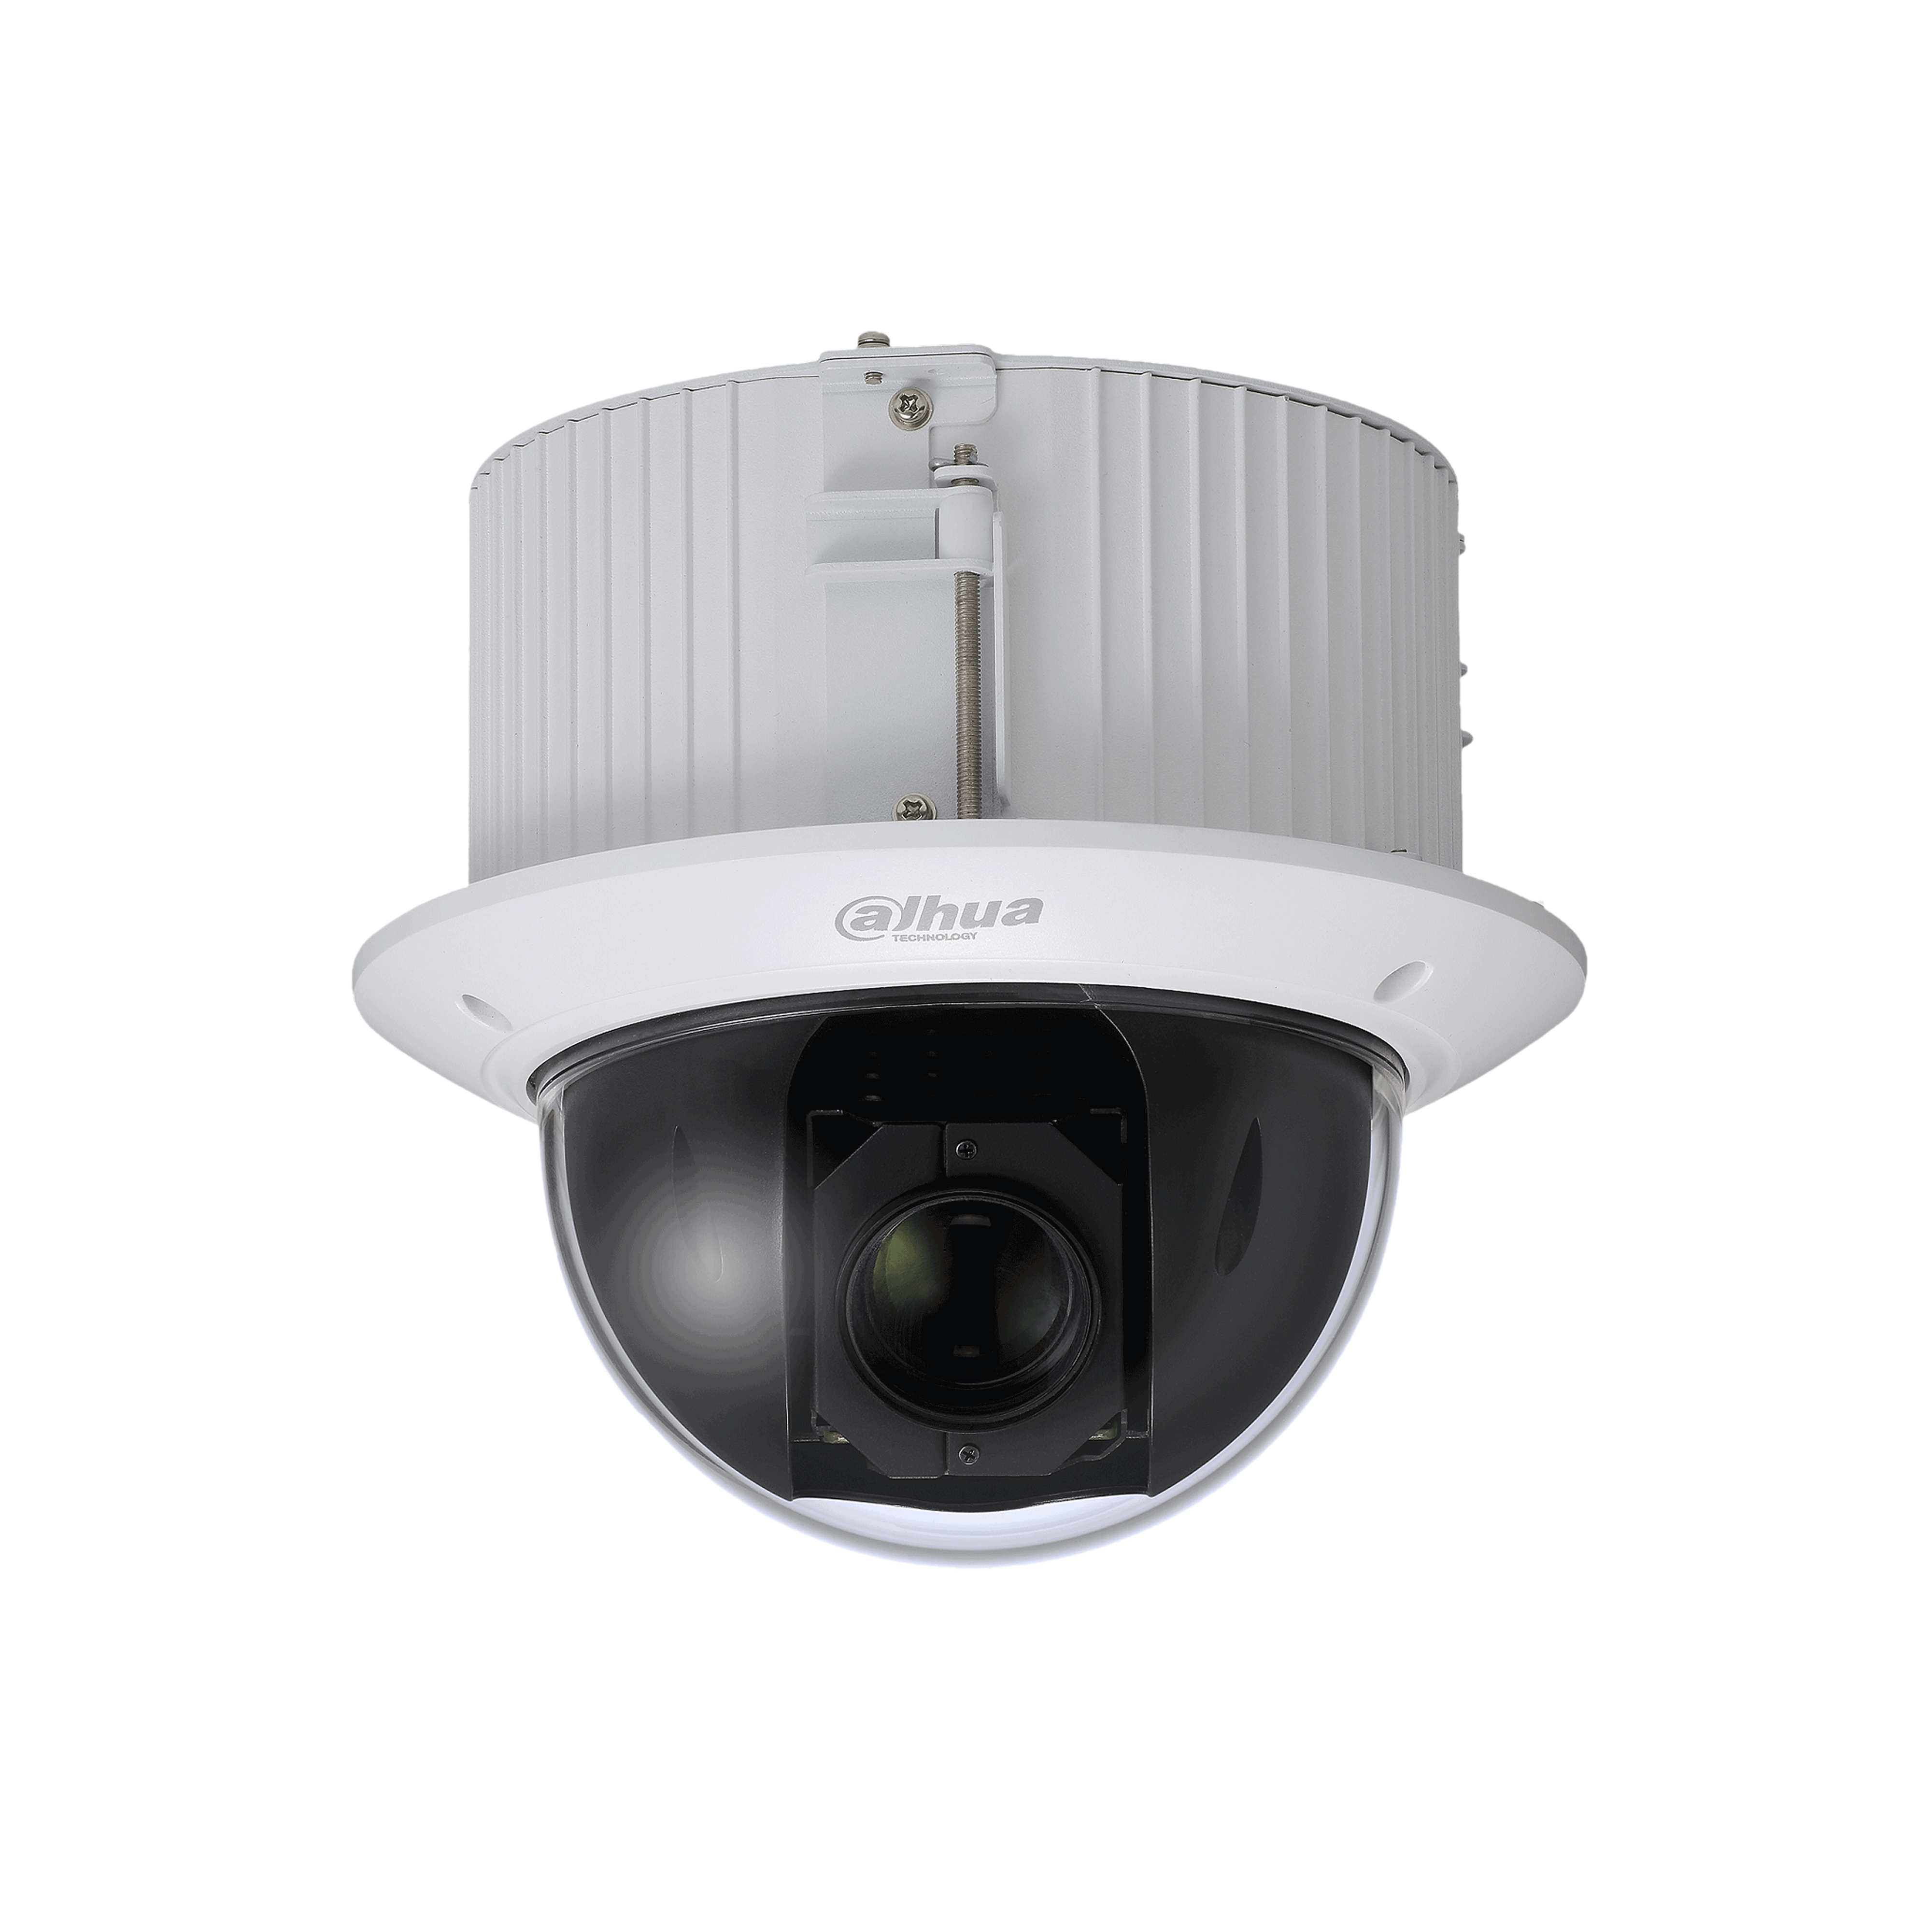 WIZSENSE SERIES IP CAMERA WHITE AI RECESSED & AUTO TRACKING 4MP H.264/4+/5/5+ SPEED DOME PTZ 120 WDR PLASTIC/METAL 4.8-154MMMOTORISED LENS 32X ZOOM STARLIGHT NO IR POE+ WITHOUT MIC AUDIO IN AUDIO OUT 2 x ALARM IN 1 x ALARM OUT SUPPORT UP TO 512GB SDIK10 24VDC